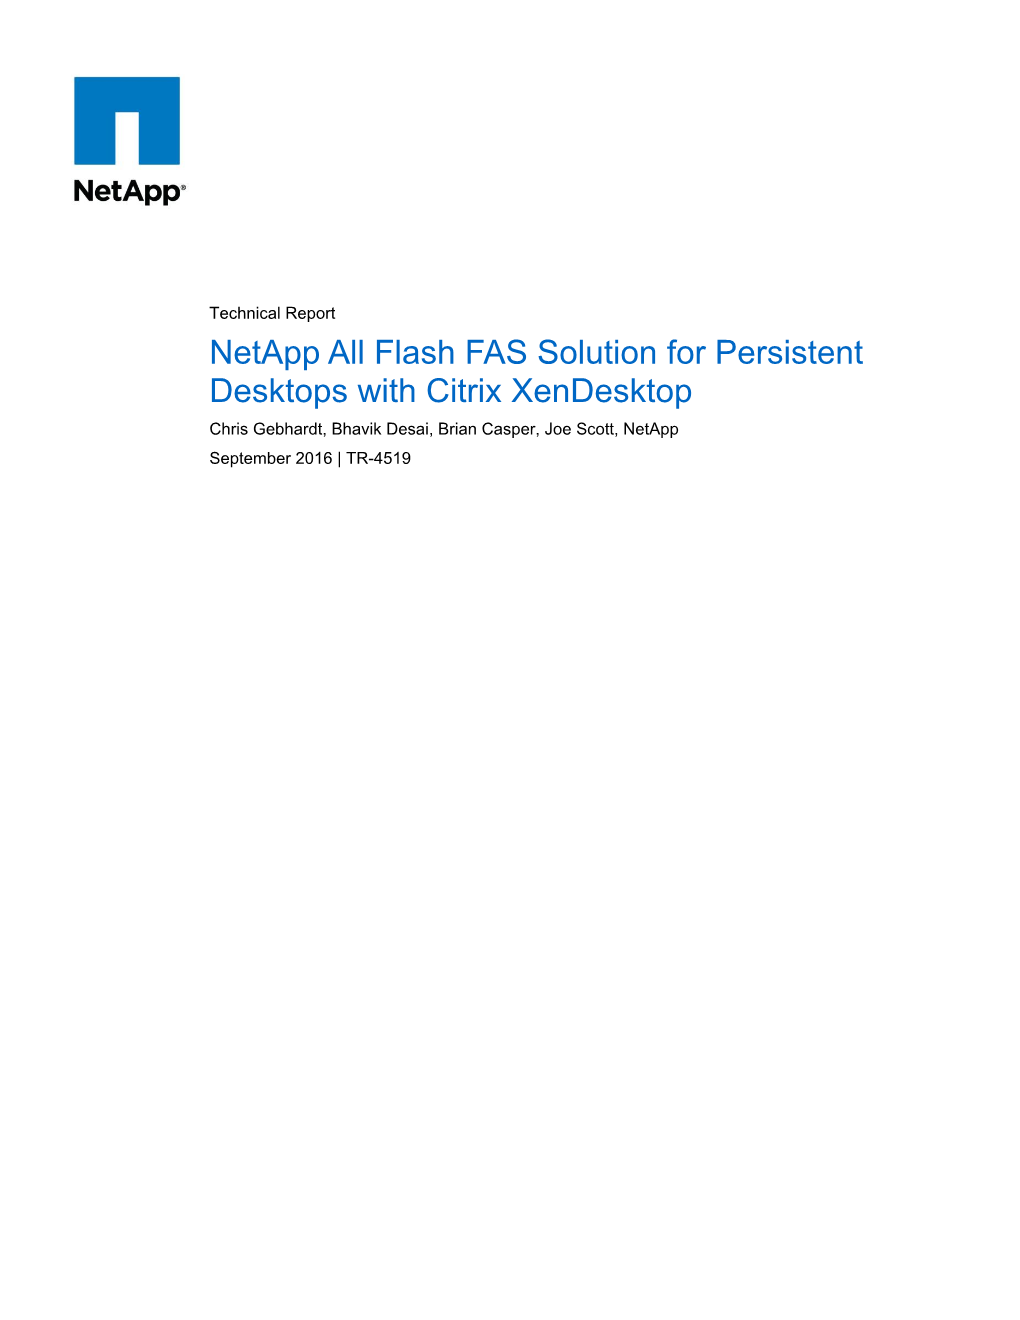 TR-4342—Netapp All-Flash FAS Xendesktop Solution for Persistent